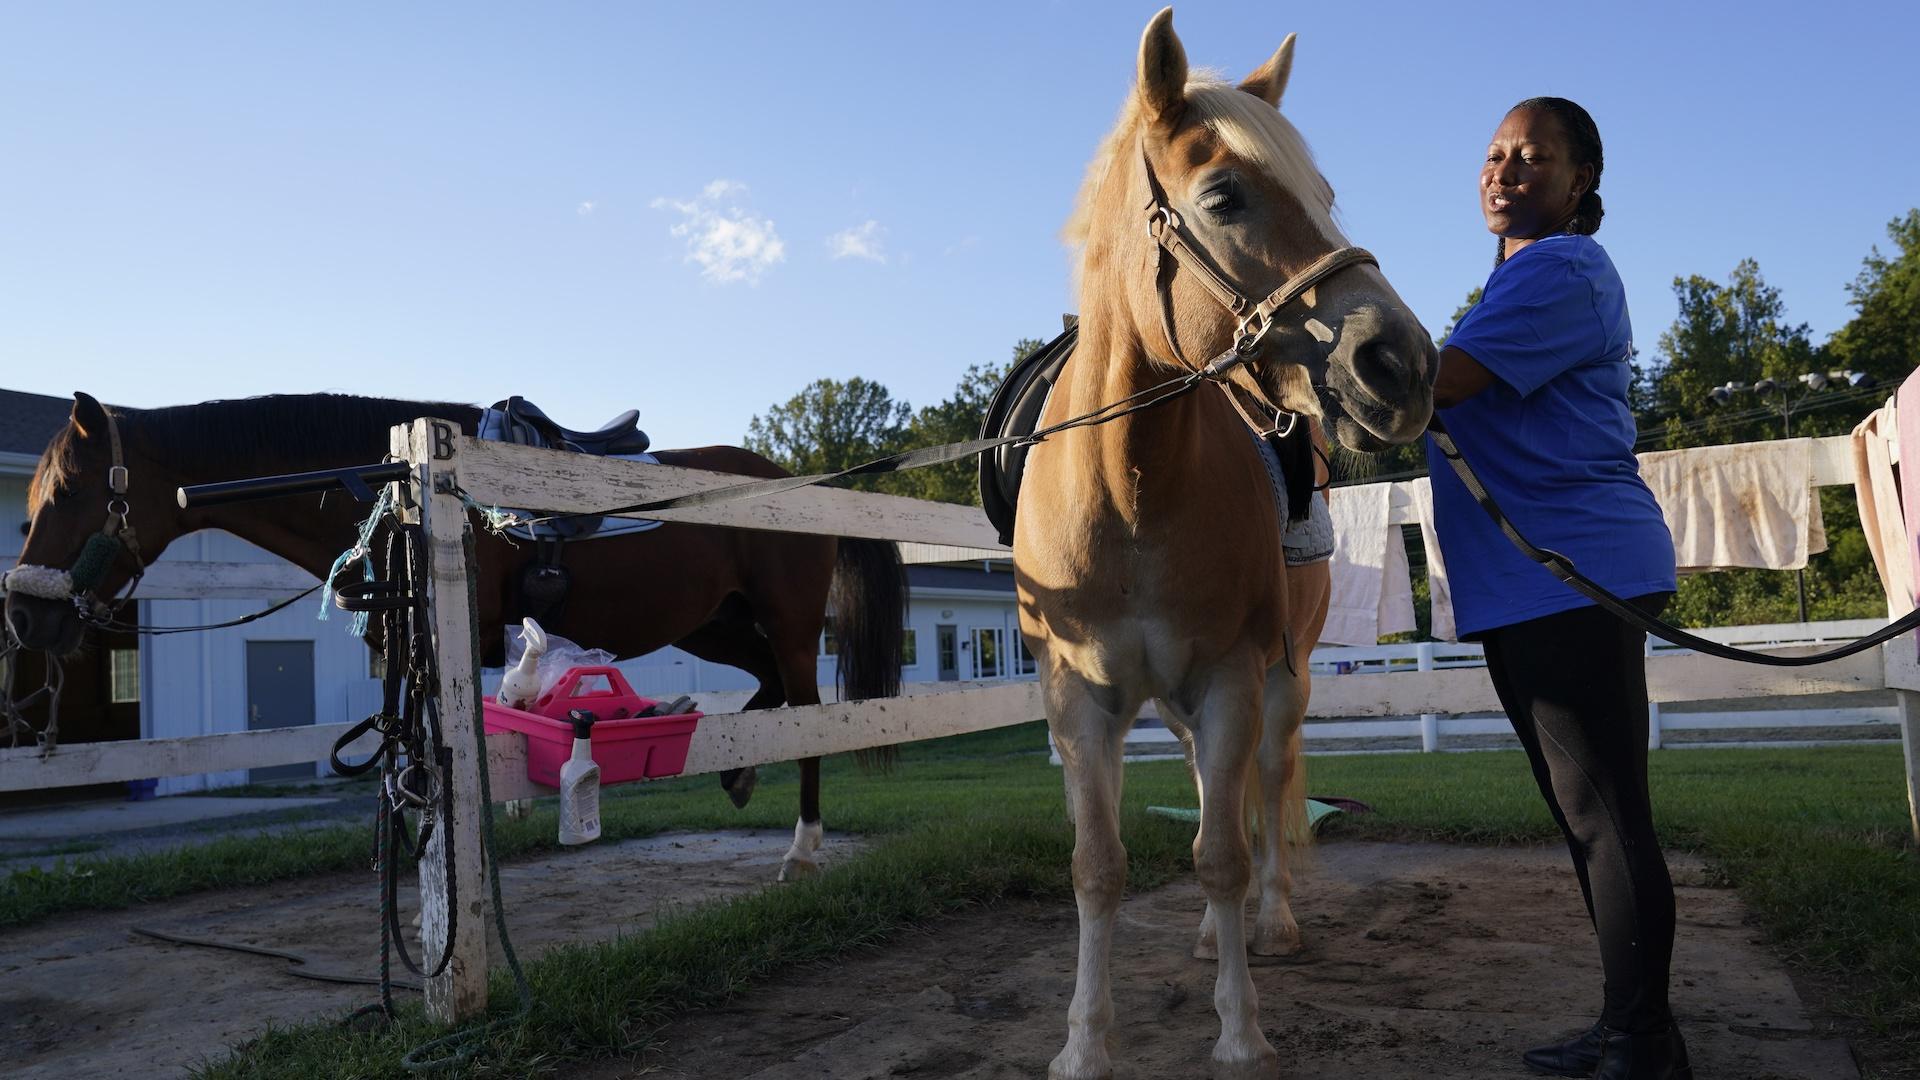 Dionne Williamson, of Patuxent River, Md., grooms Woody before her riding lesson at Cloverleaf Equine Center in Clifton, Va., Tuesday, Sept. 13, 2022. (AP Photo/Susan Walsh)